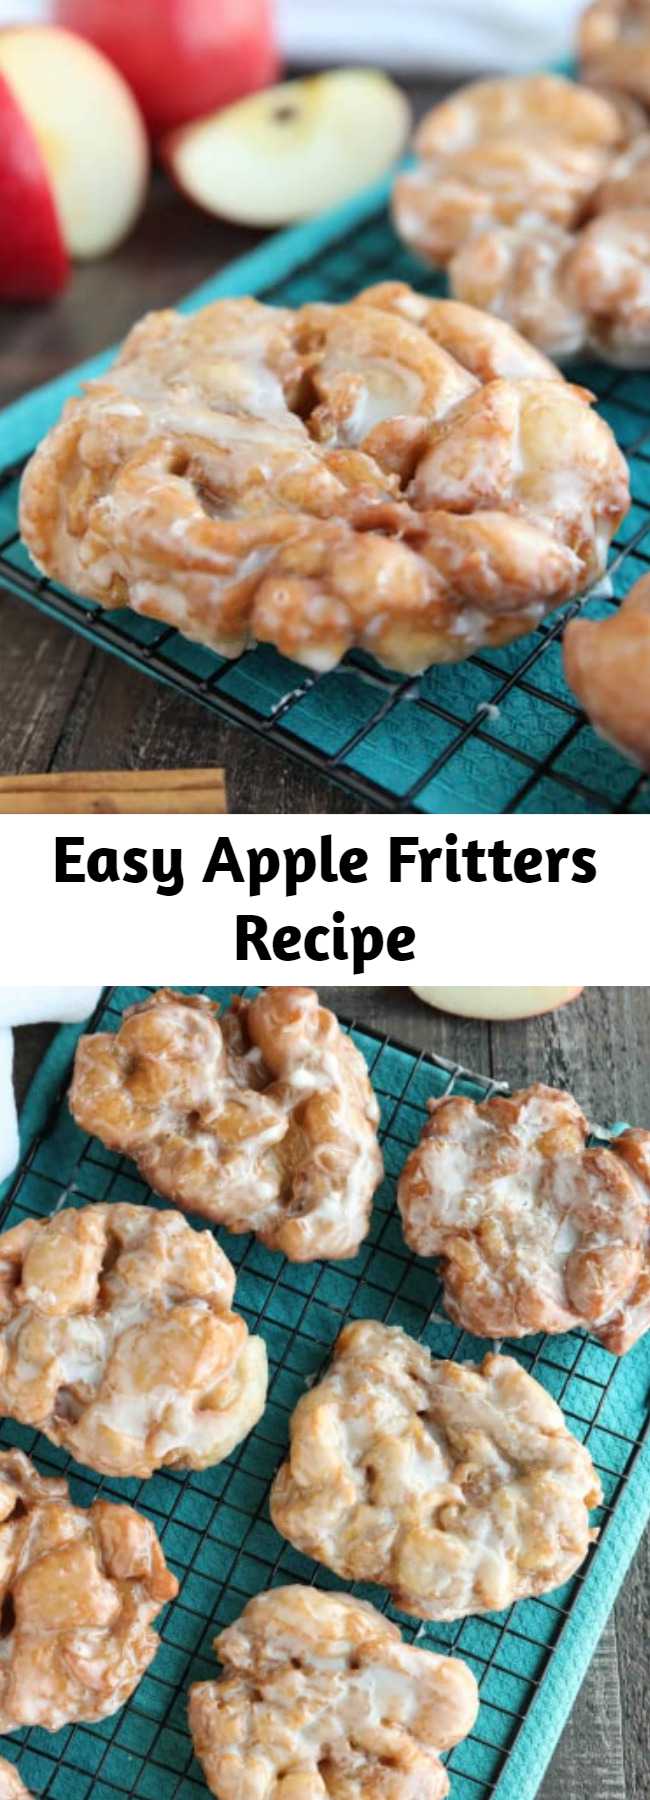 Easy Apple Fritters Recipe - An easy and delicious yeast doughnut with chunks of apples, ground cinnamon, and a sweet glaze.